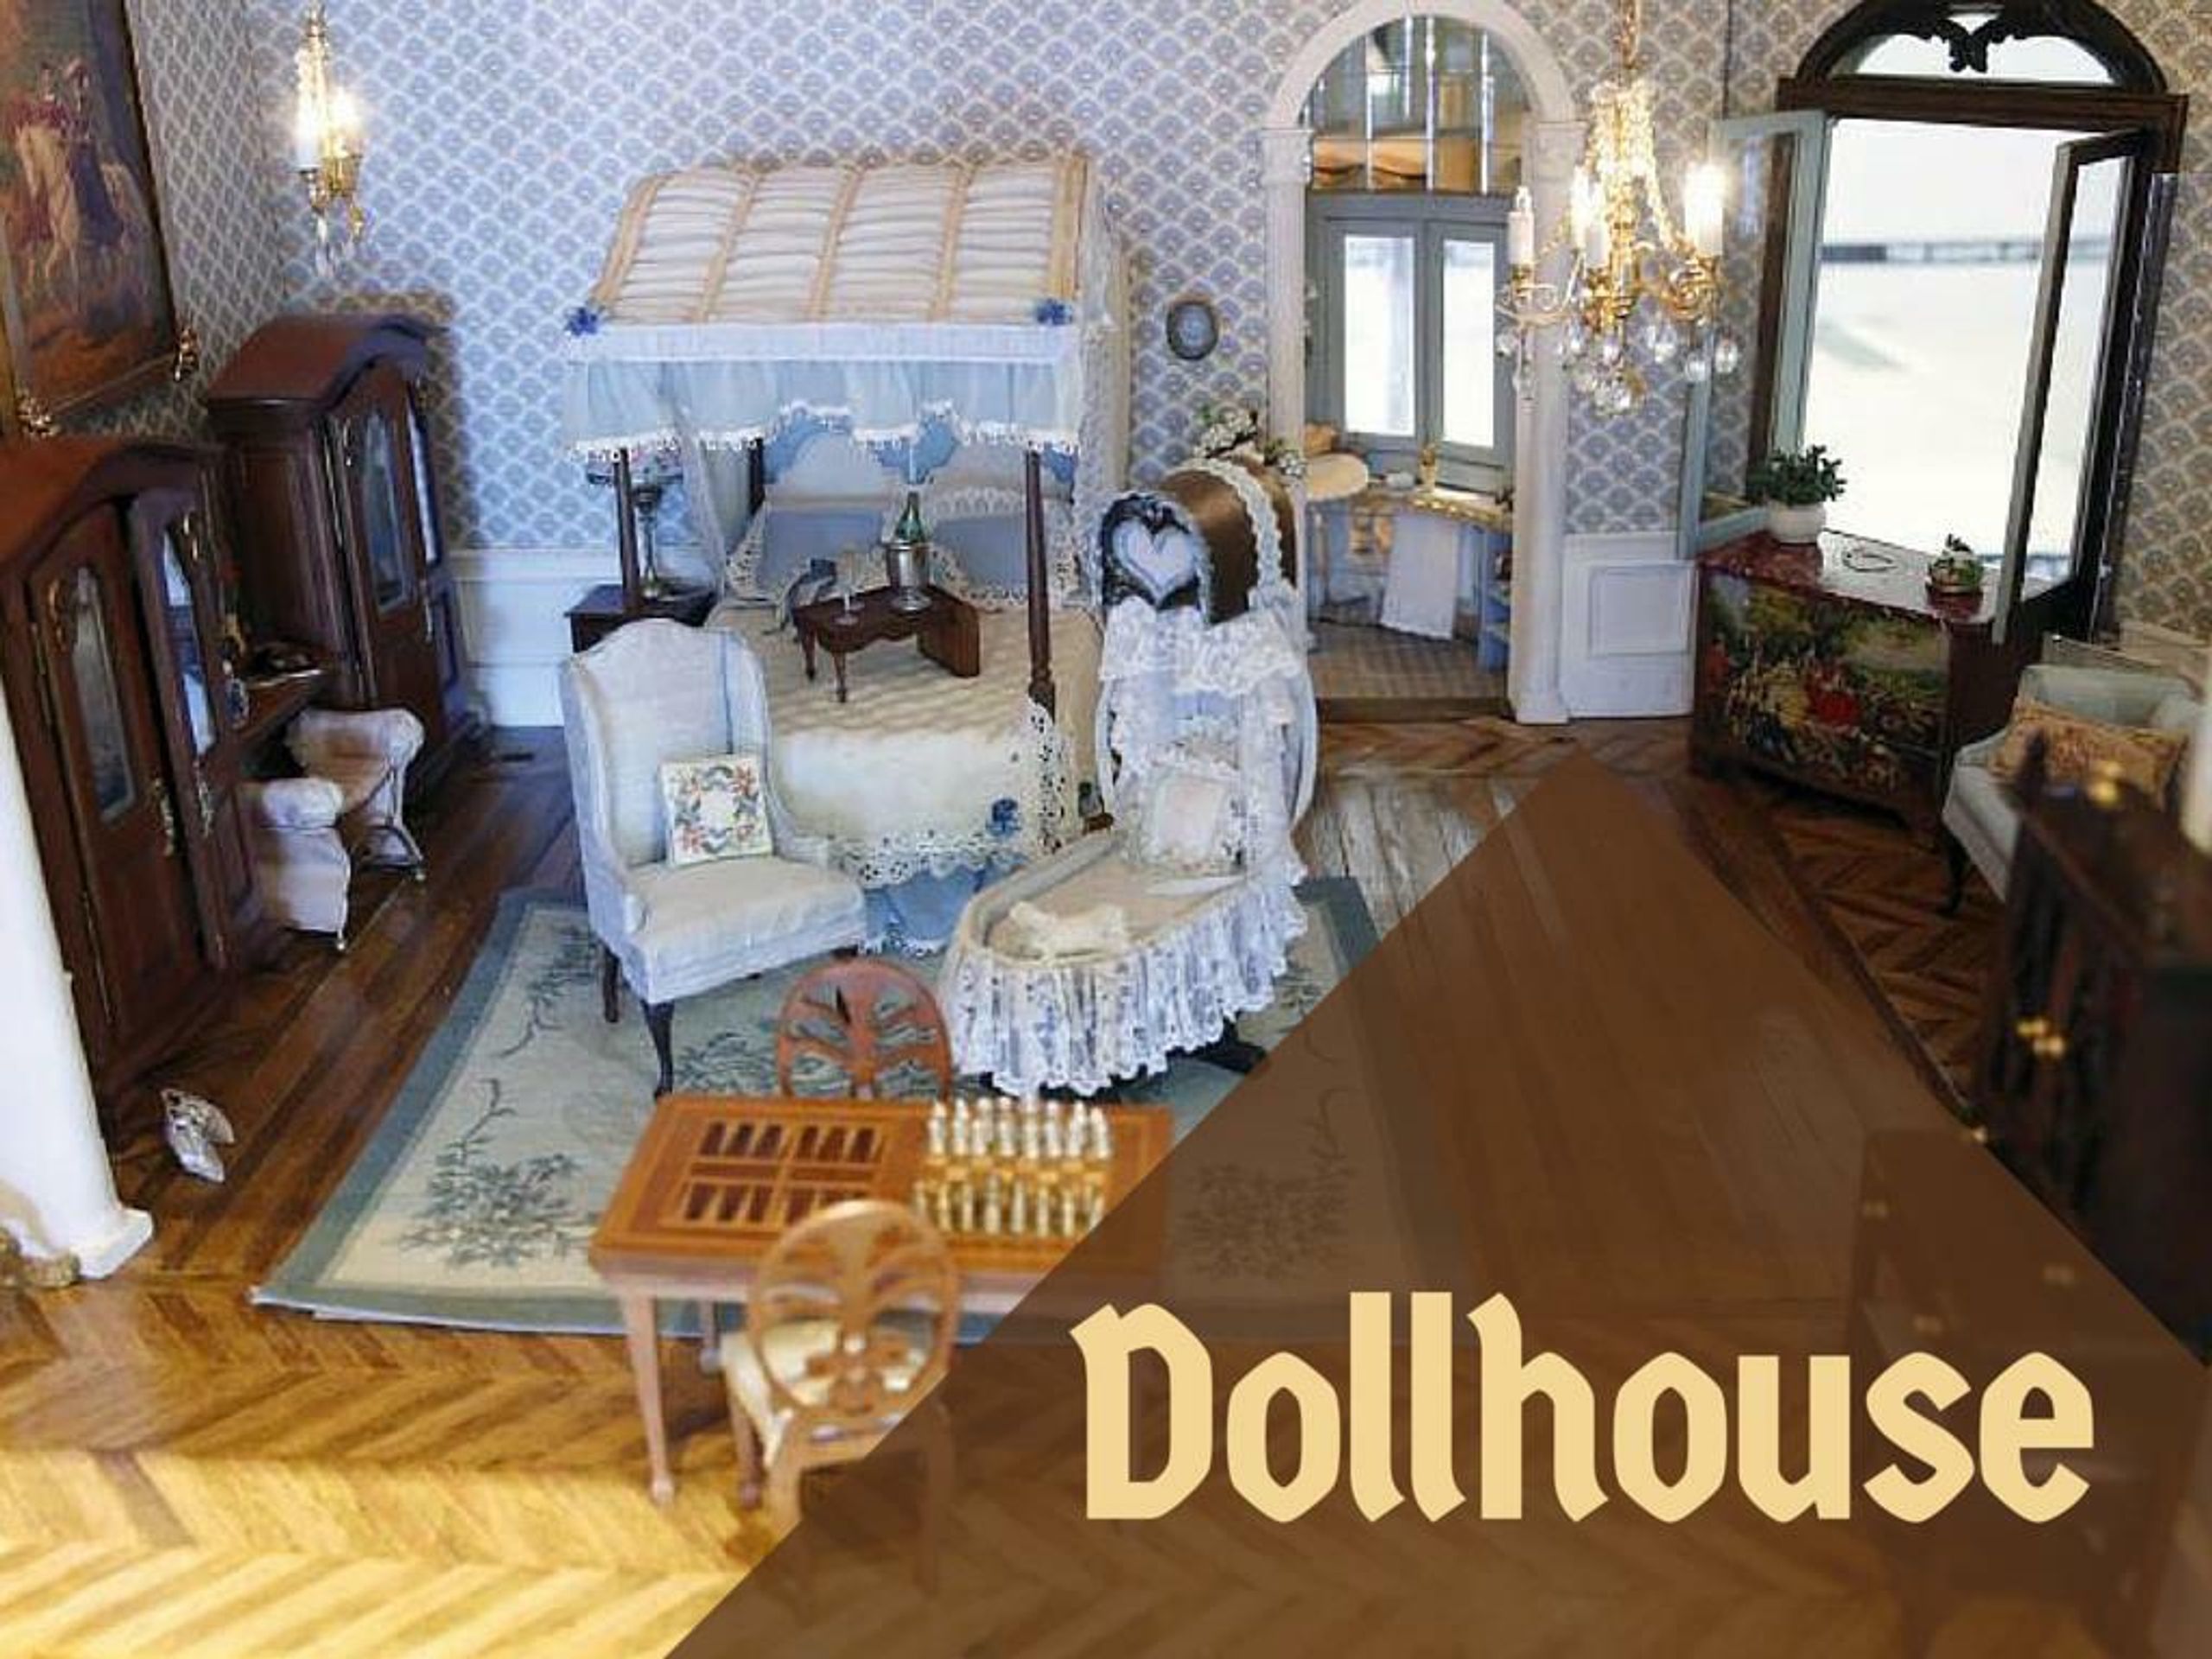 Dollhouse Appraised at $8.5 Million Is to Tour - The New York Times